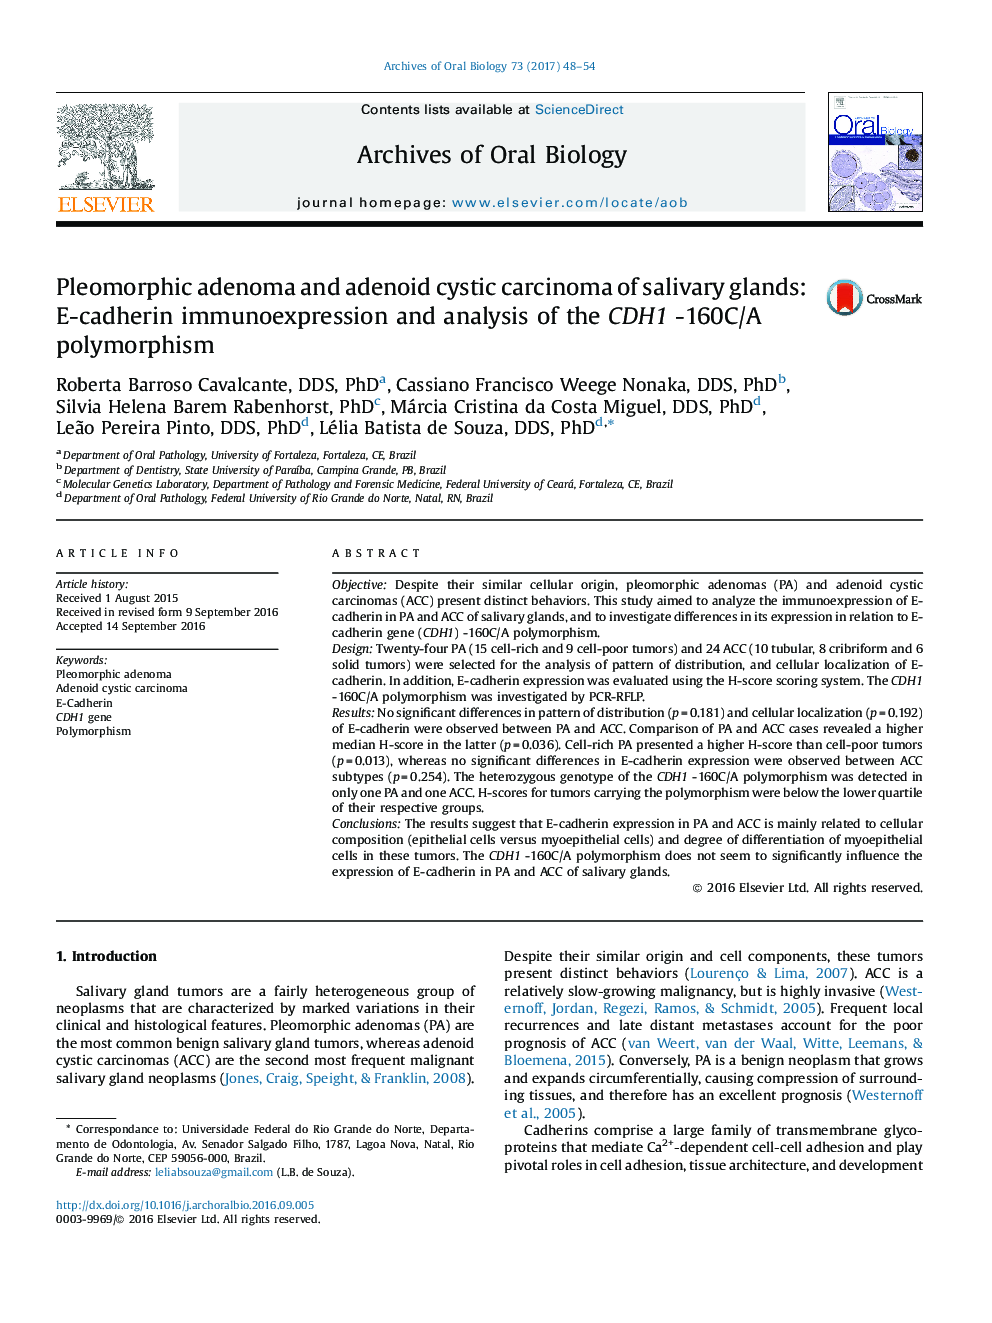 Pleomorphic adenoma and adenoid cystic carcinoma of salivary glands: E-cadherin immunoexpression and analysis of the CDH1 -160C/A polymorphism